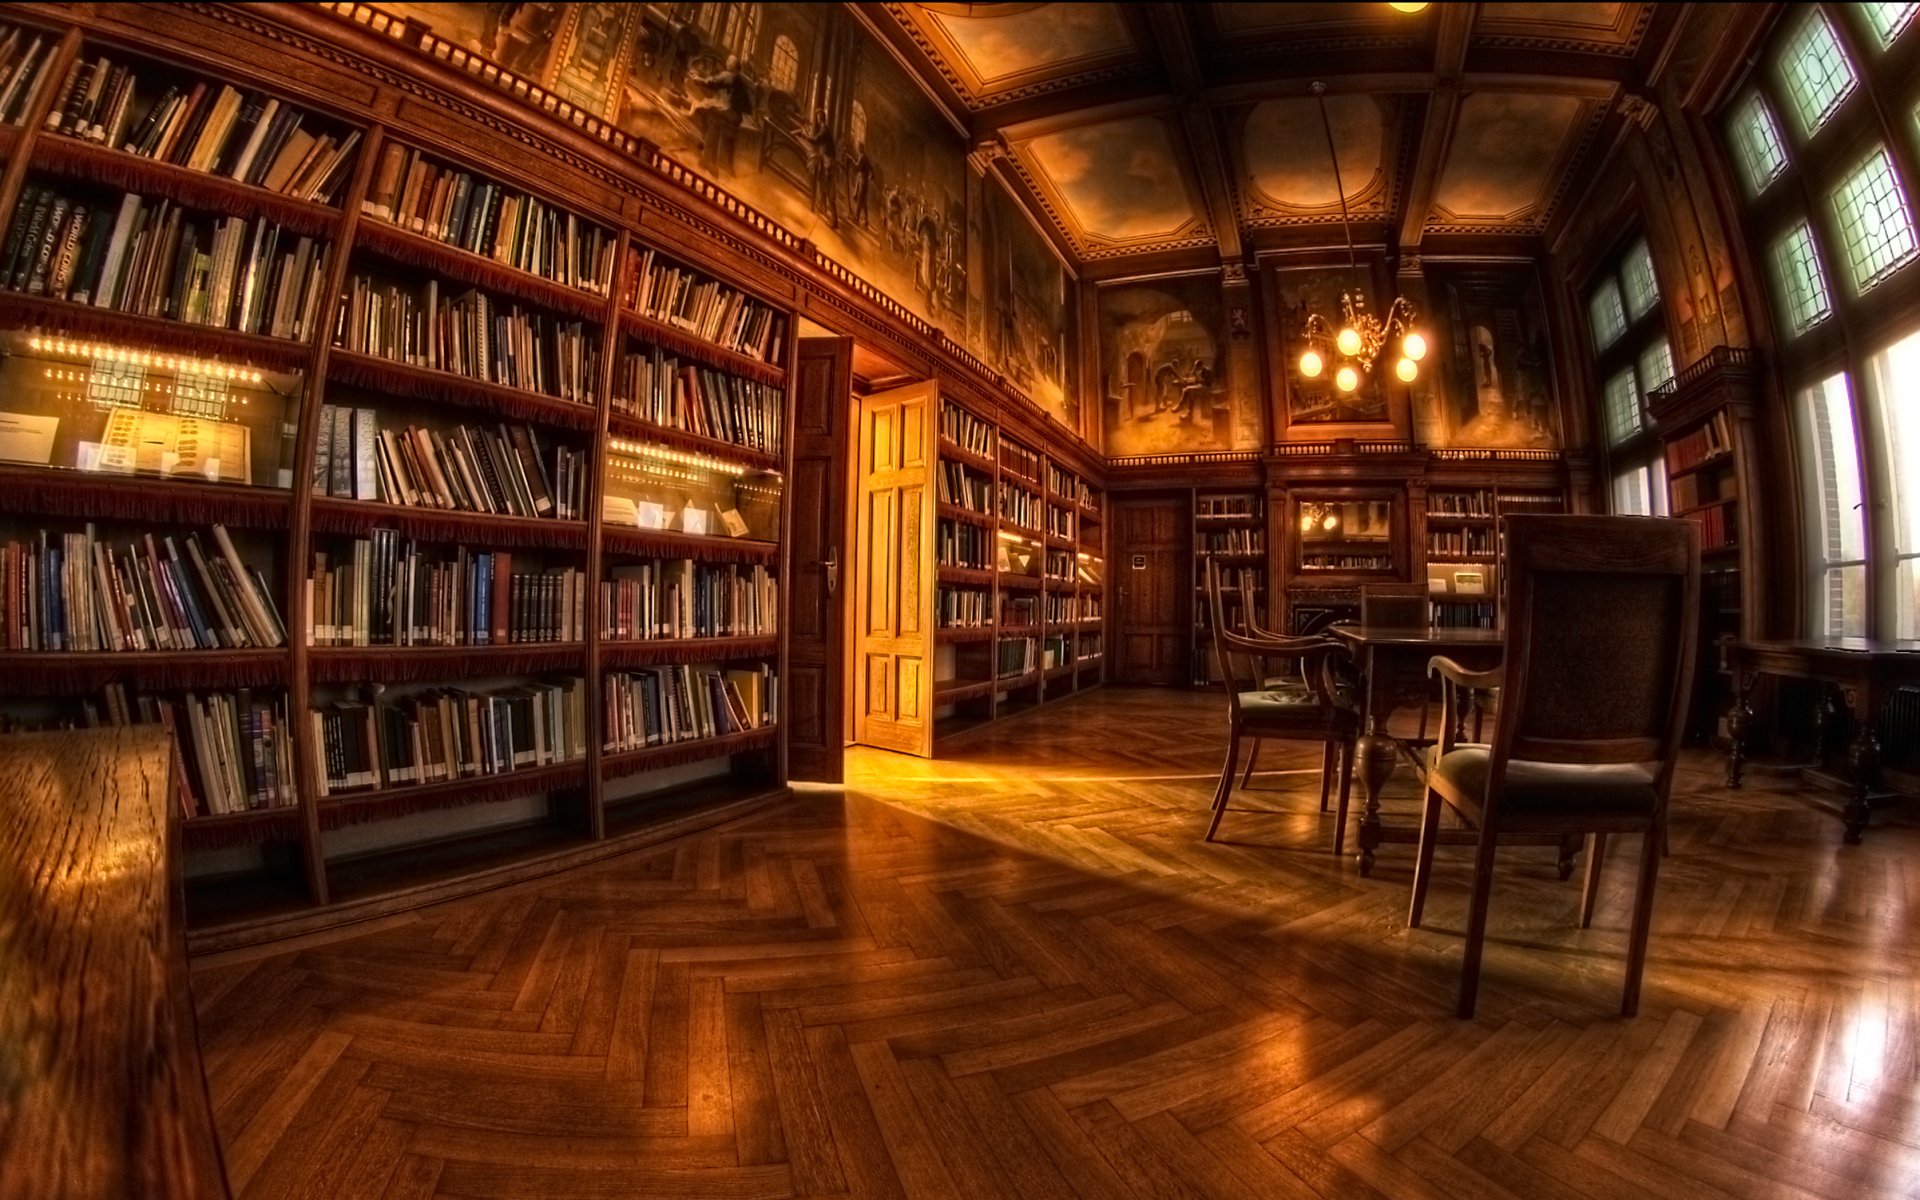 70+] Library Background Images - WallpaperSafari